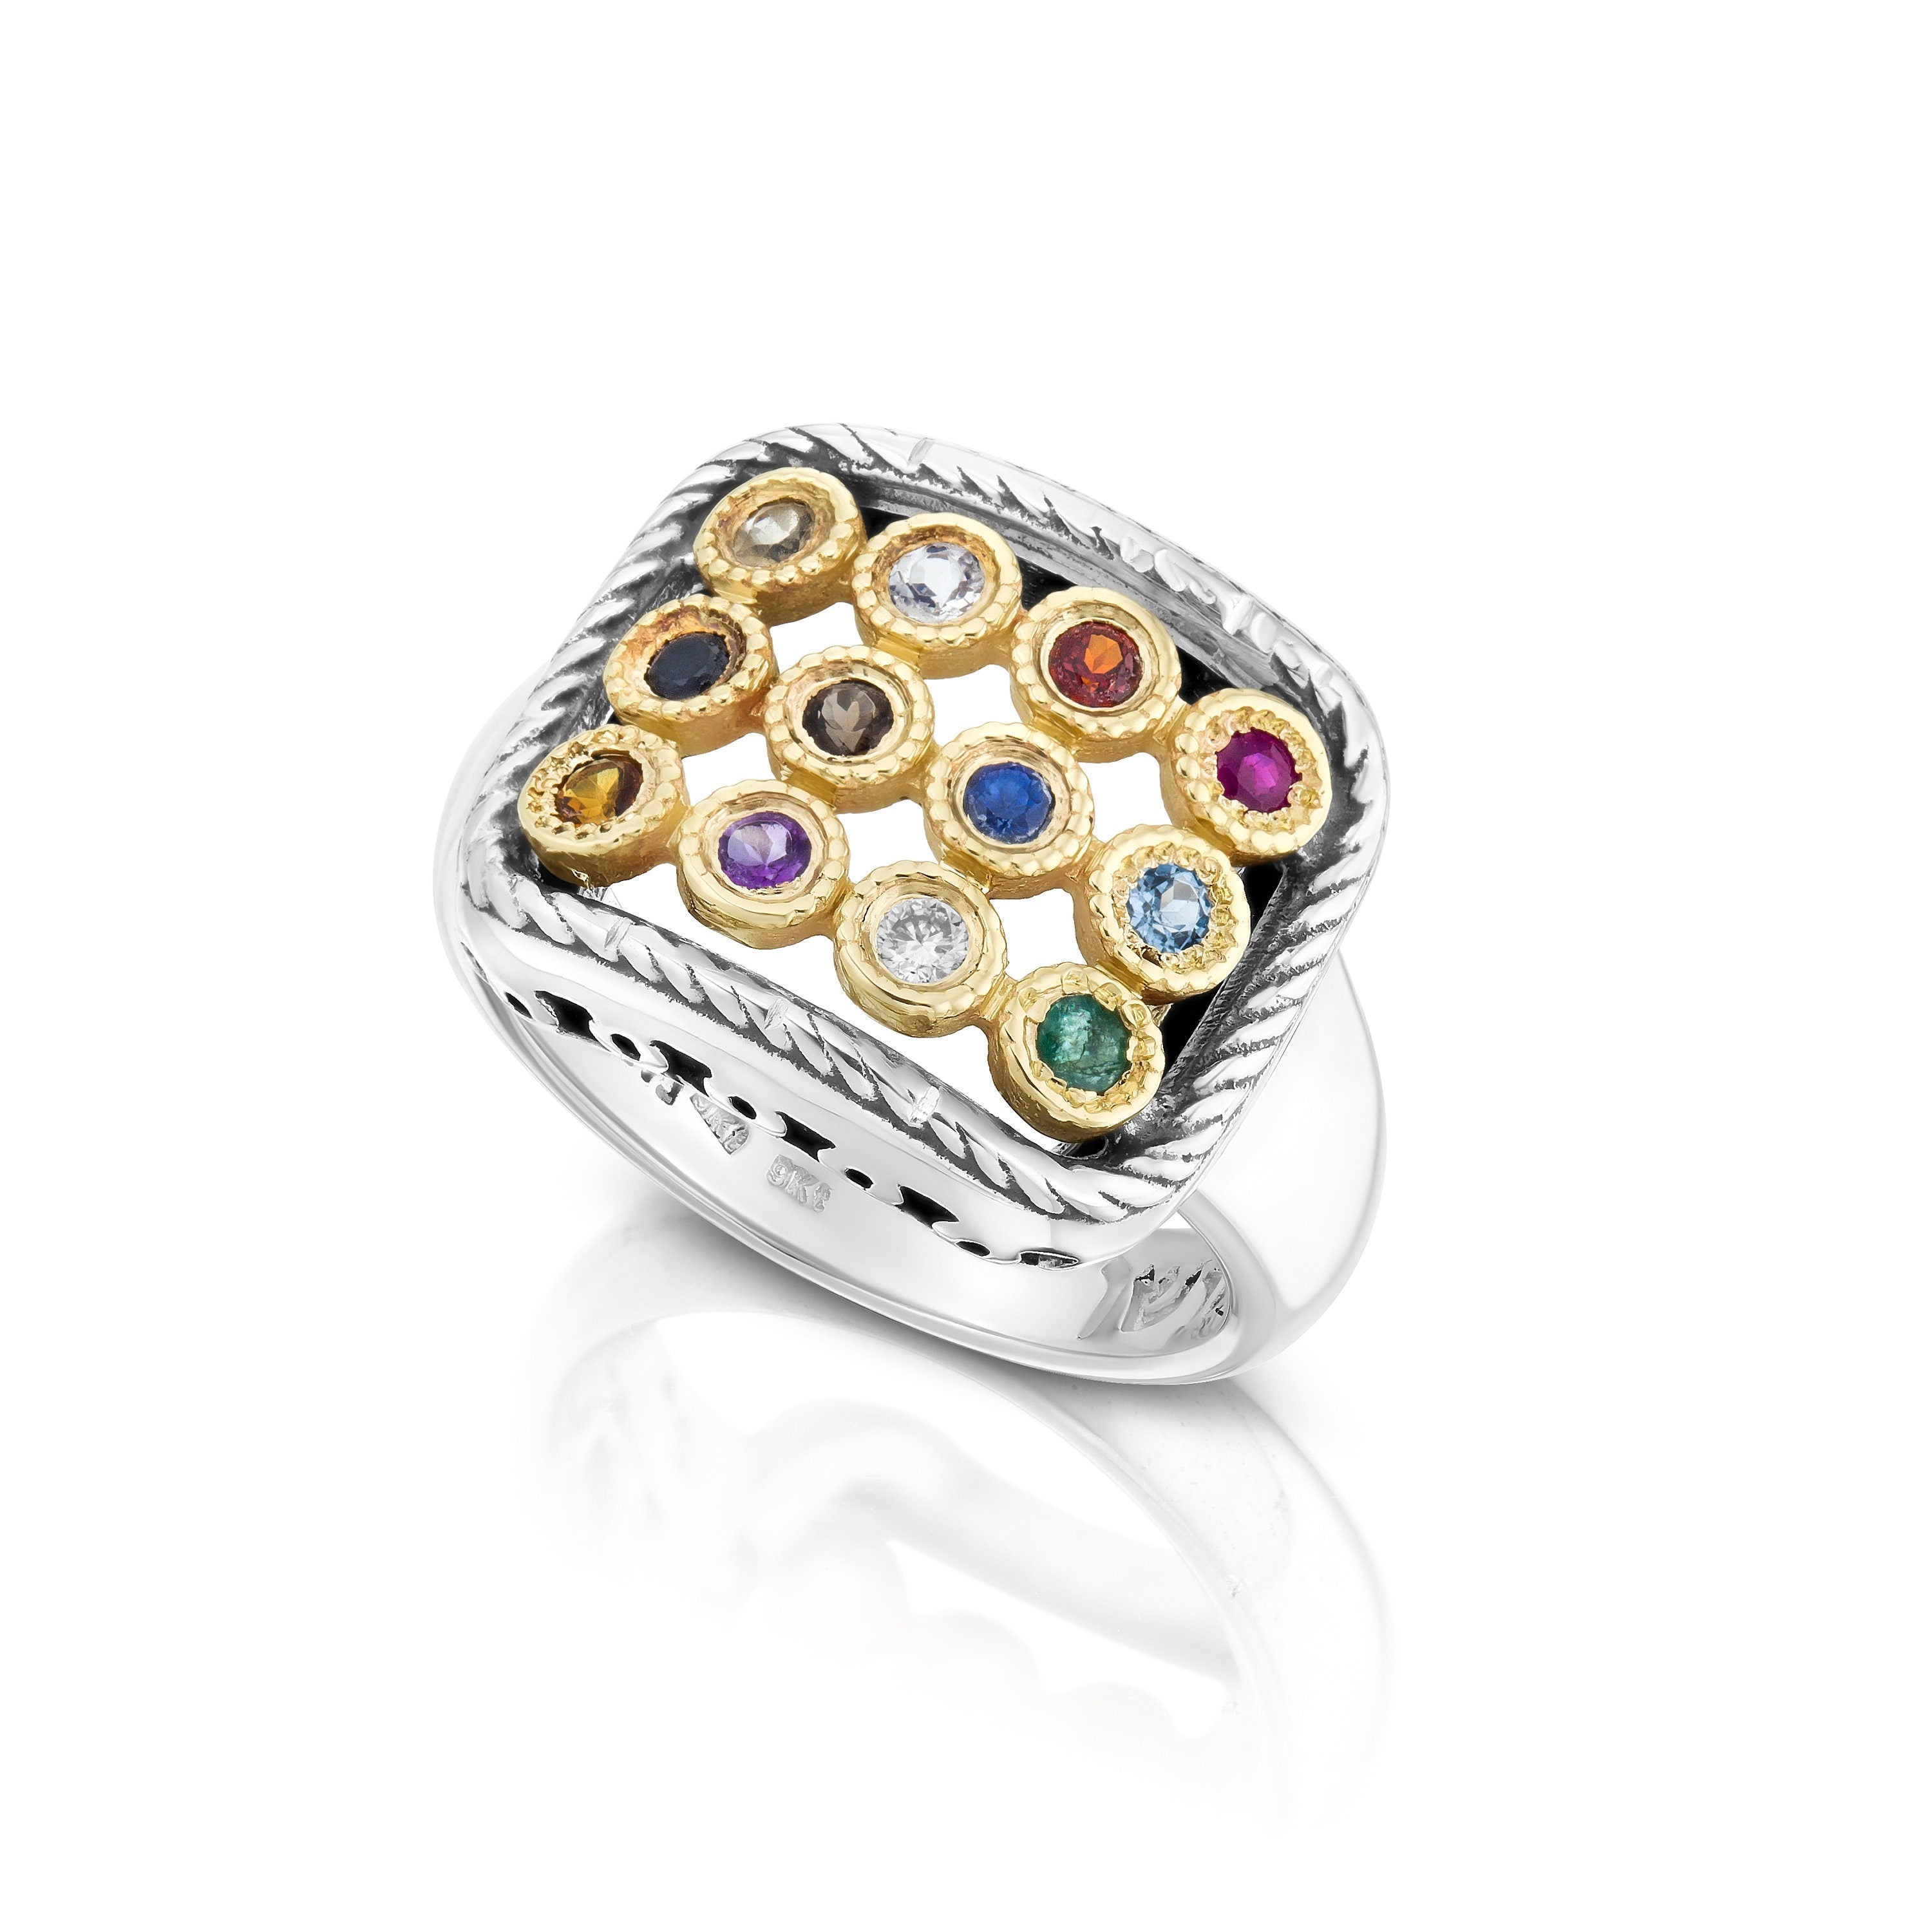 Hoshen Breastplate Ring in Silver and Gold - Jewish Jewelry for Women, 50th Birthday Gift for Her - Direct Connection with the Creator